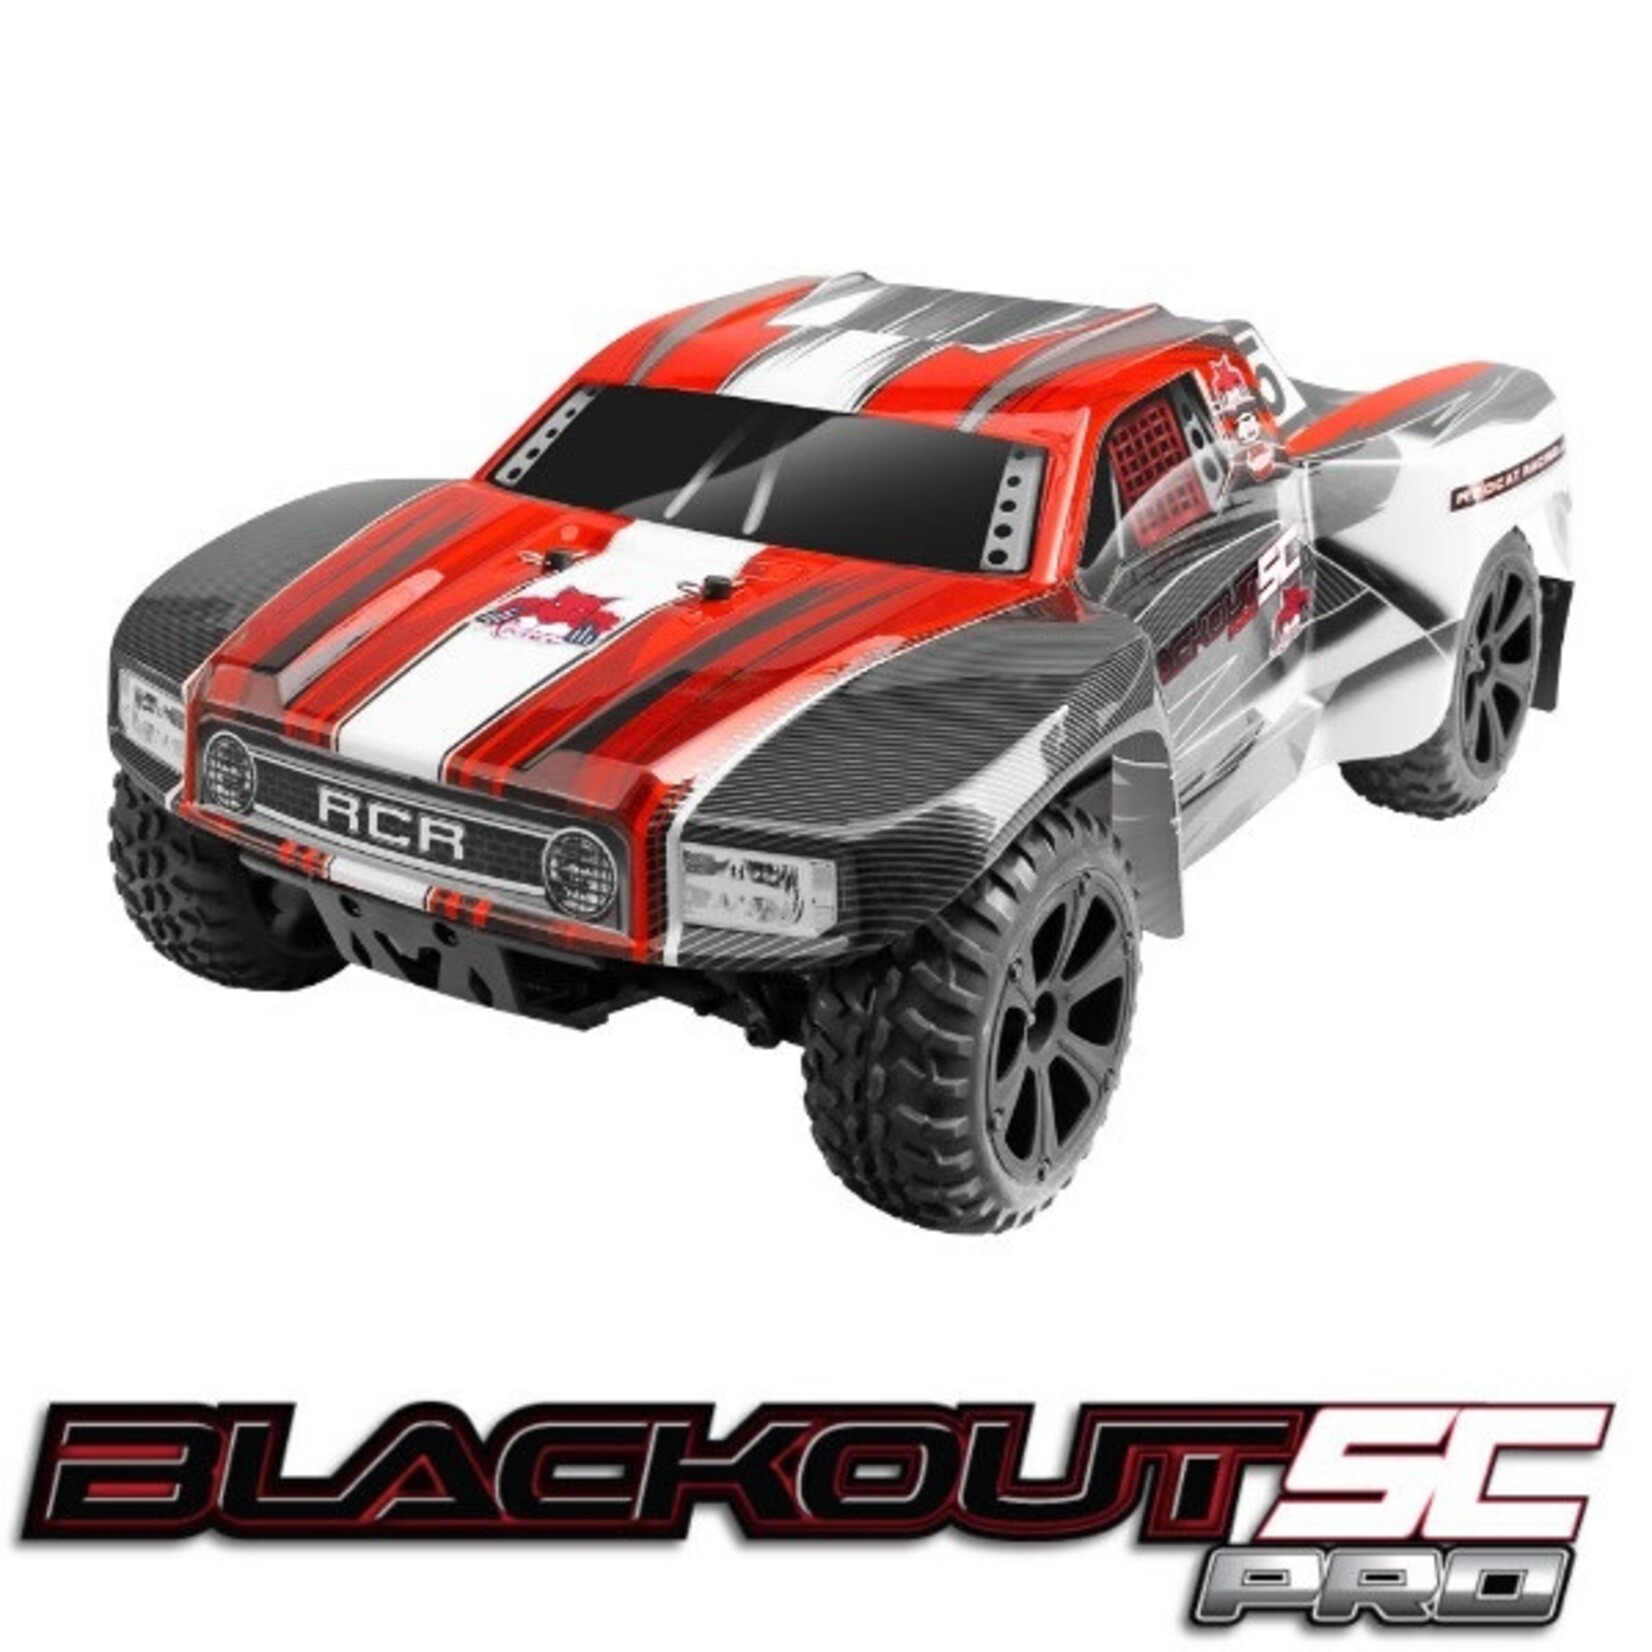 Redcat Racing Blackout SC PRO Brushless 1/10 Scale Electric Short Course Truck  RER07119